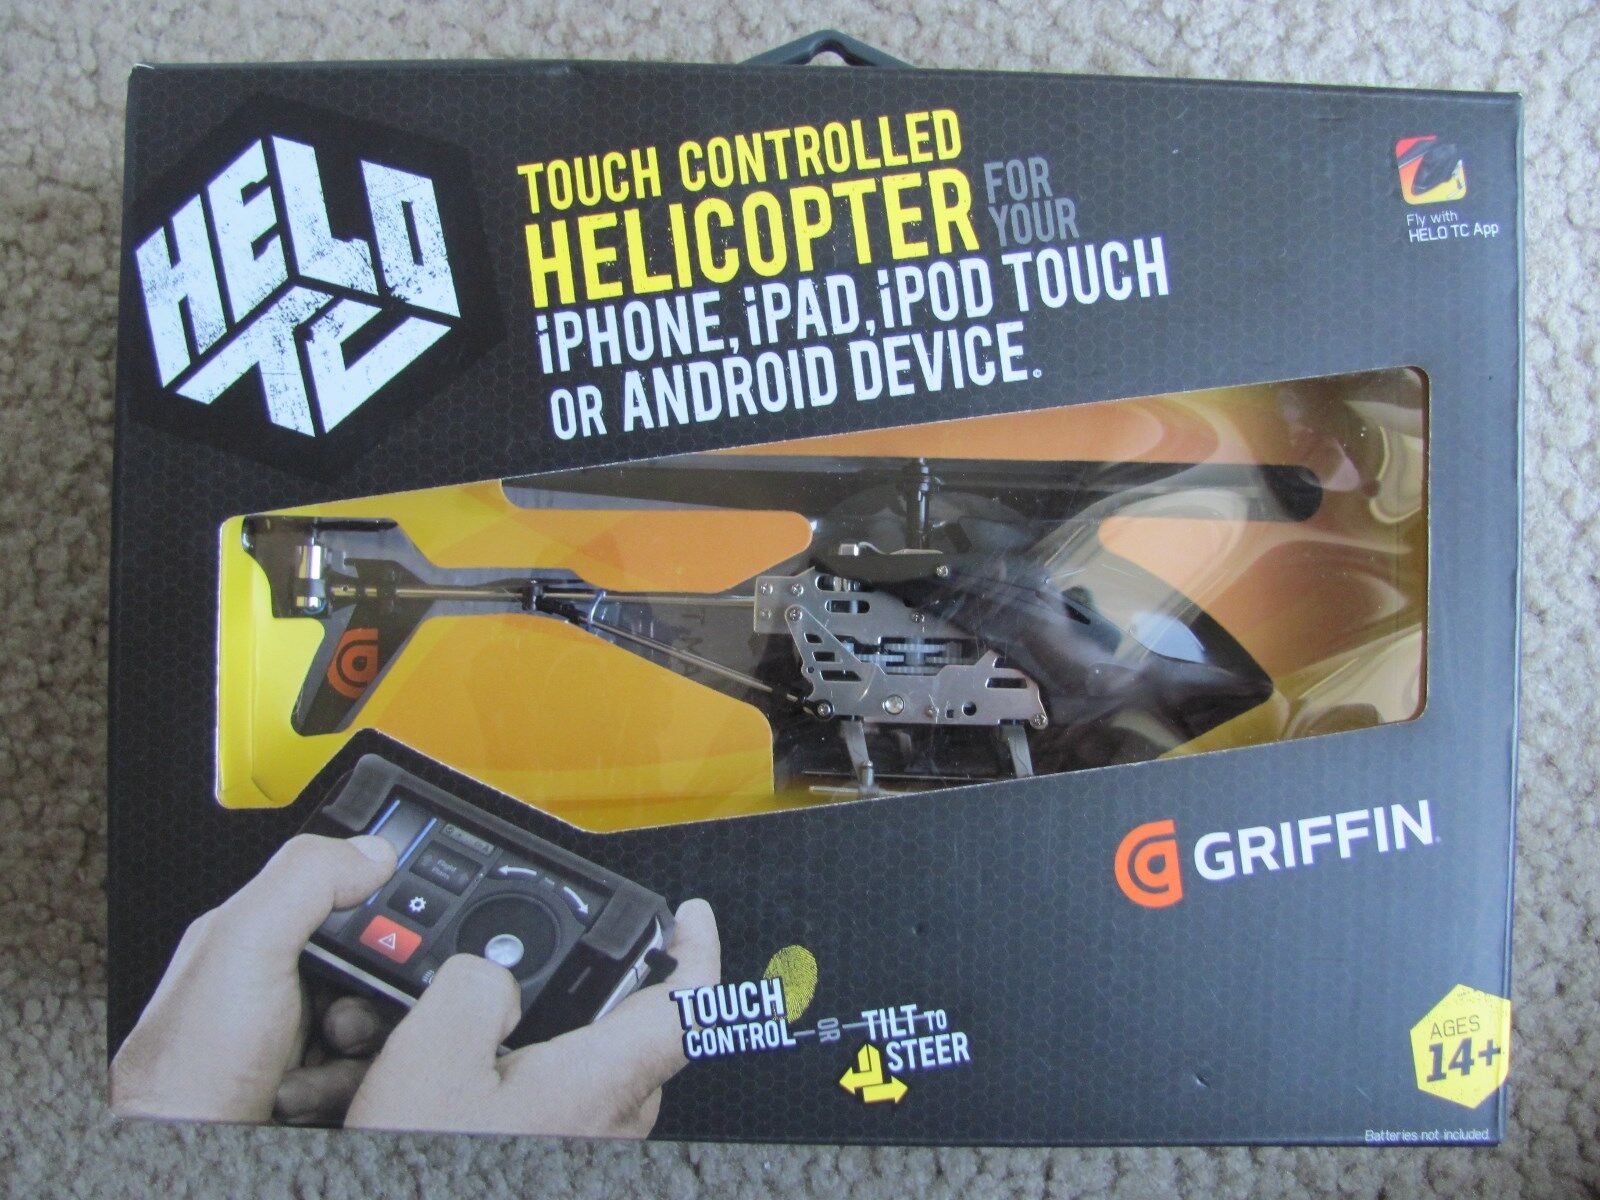 New HELO TC Touch Controlled Helicopter for iPhone, iPad, iPod touch or Android